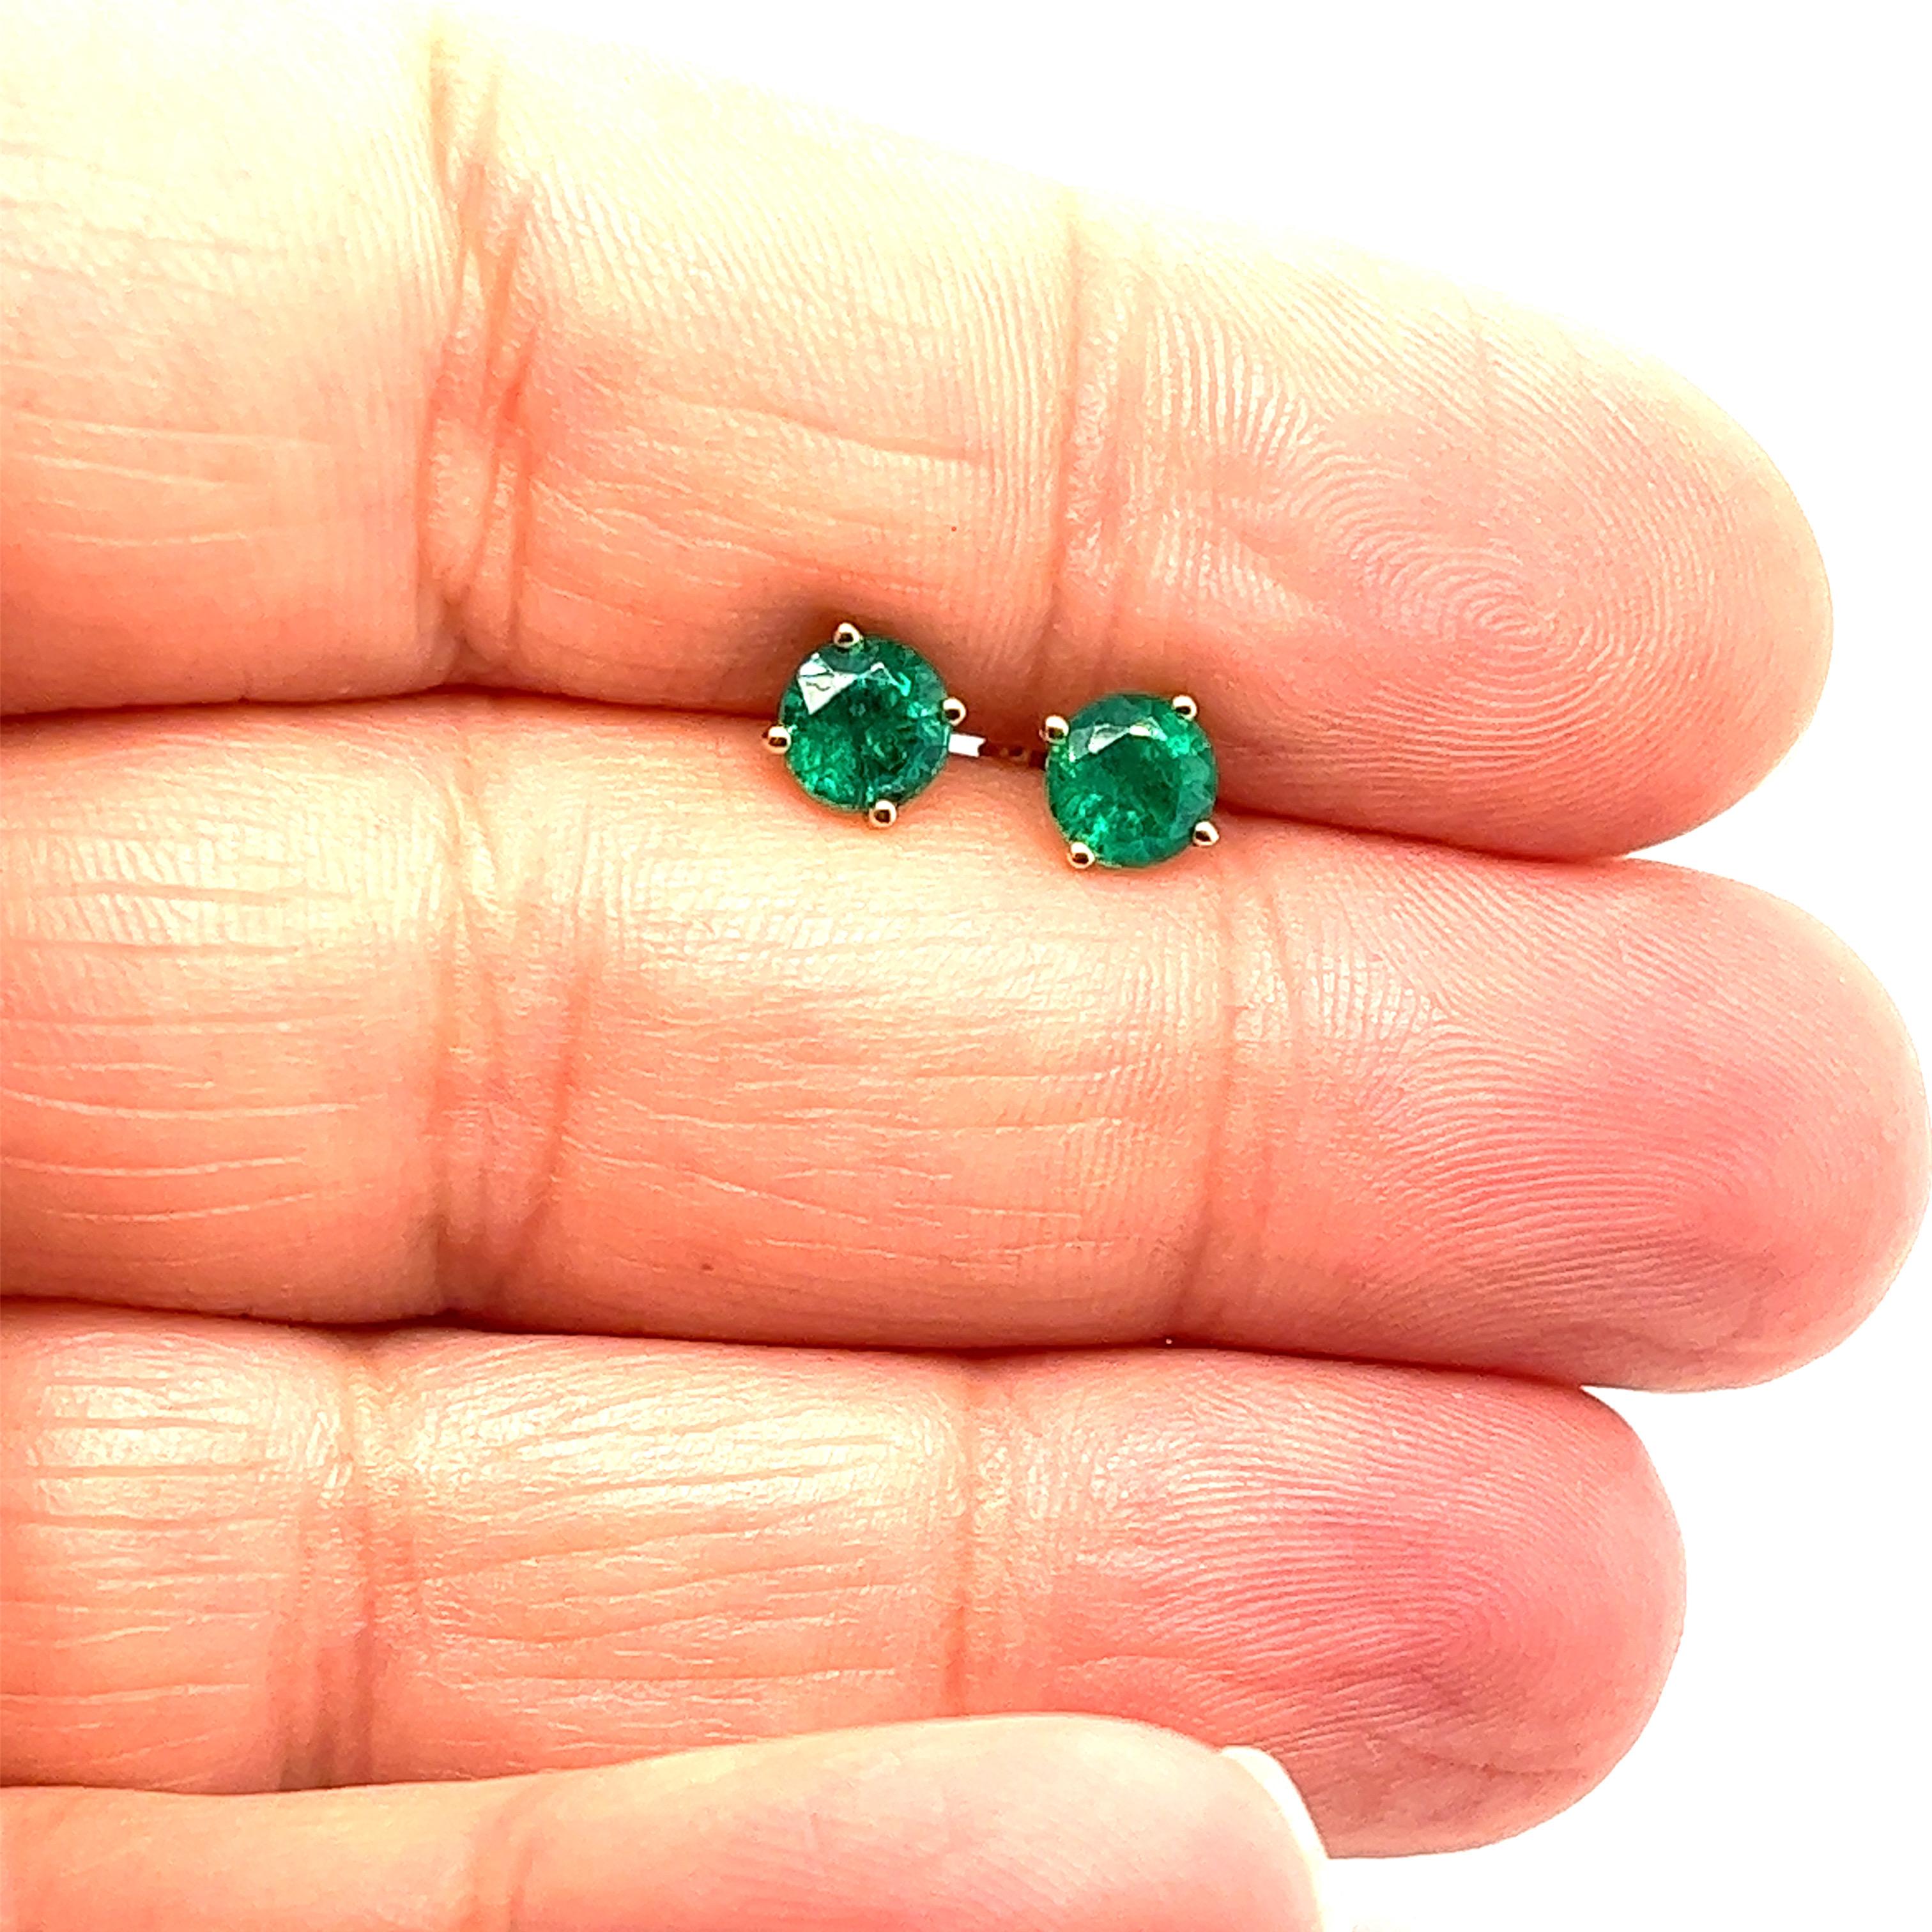 Contemporary 1.45 carats round Emerald Stud Earrings in 14K Yellow Gold. For Sale